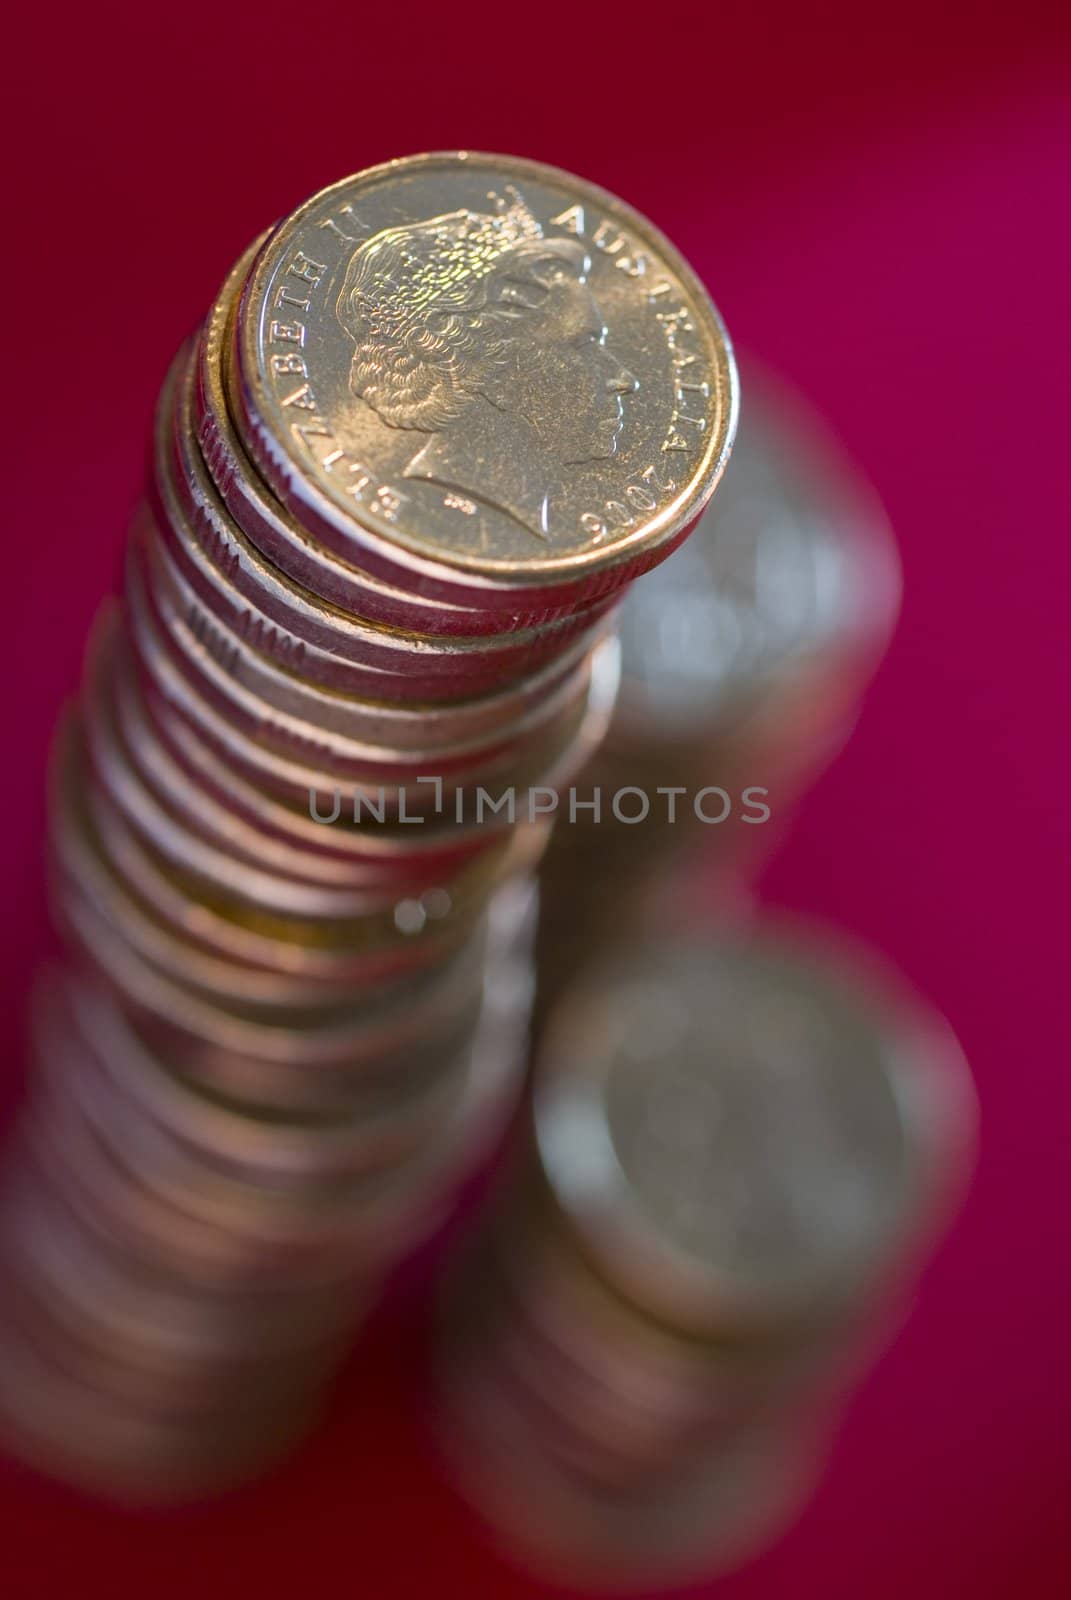 a large stack of australian dollar coins on a red background